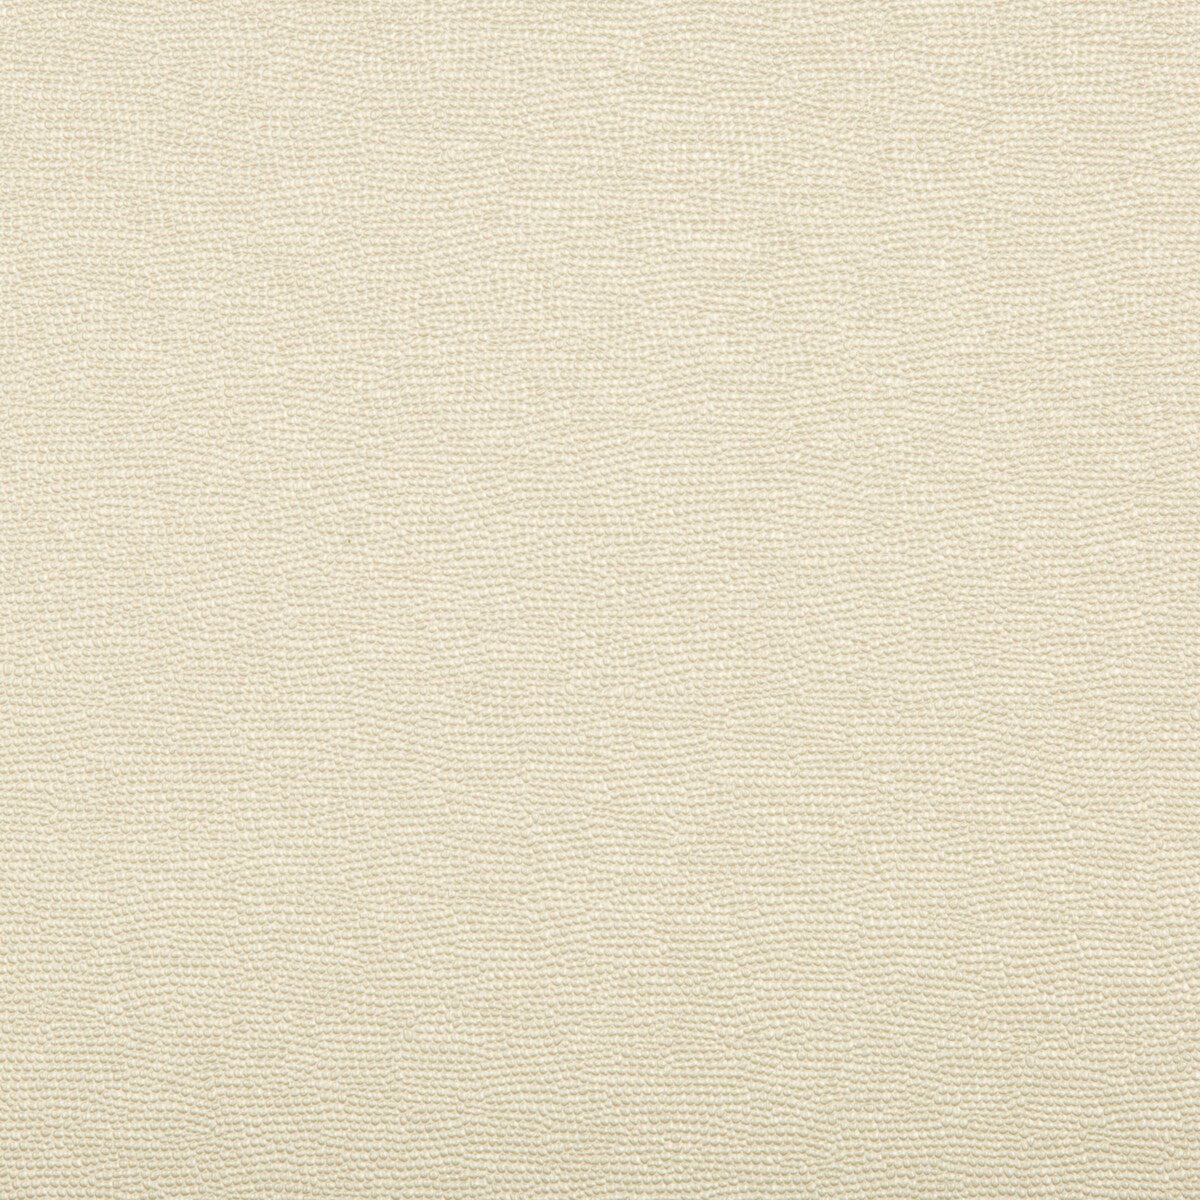 Spartan fabric in pearl color - pattern SPARTAN.1611.0 - by Kravet Contract in the Faux Leather Extreme Performance collection